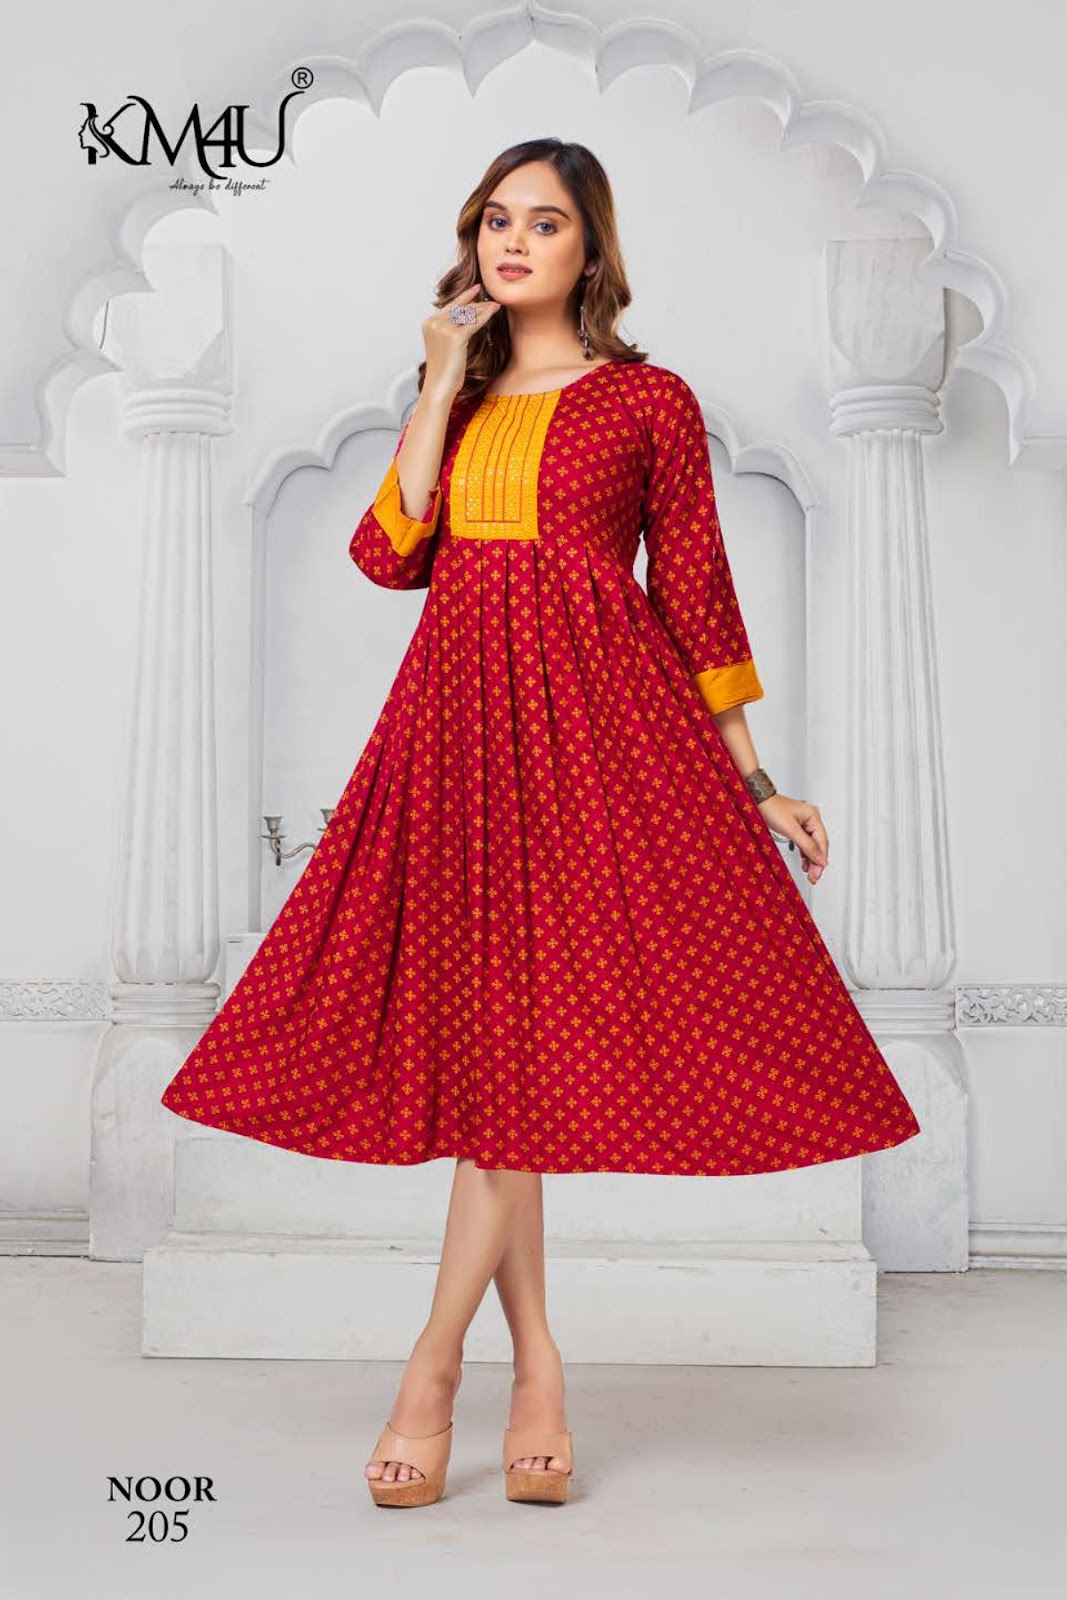 Discover more than 140 kurti and lagging